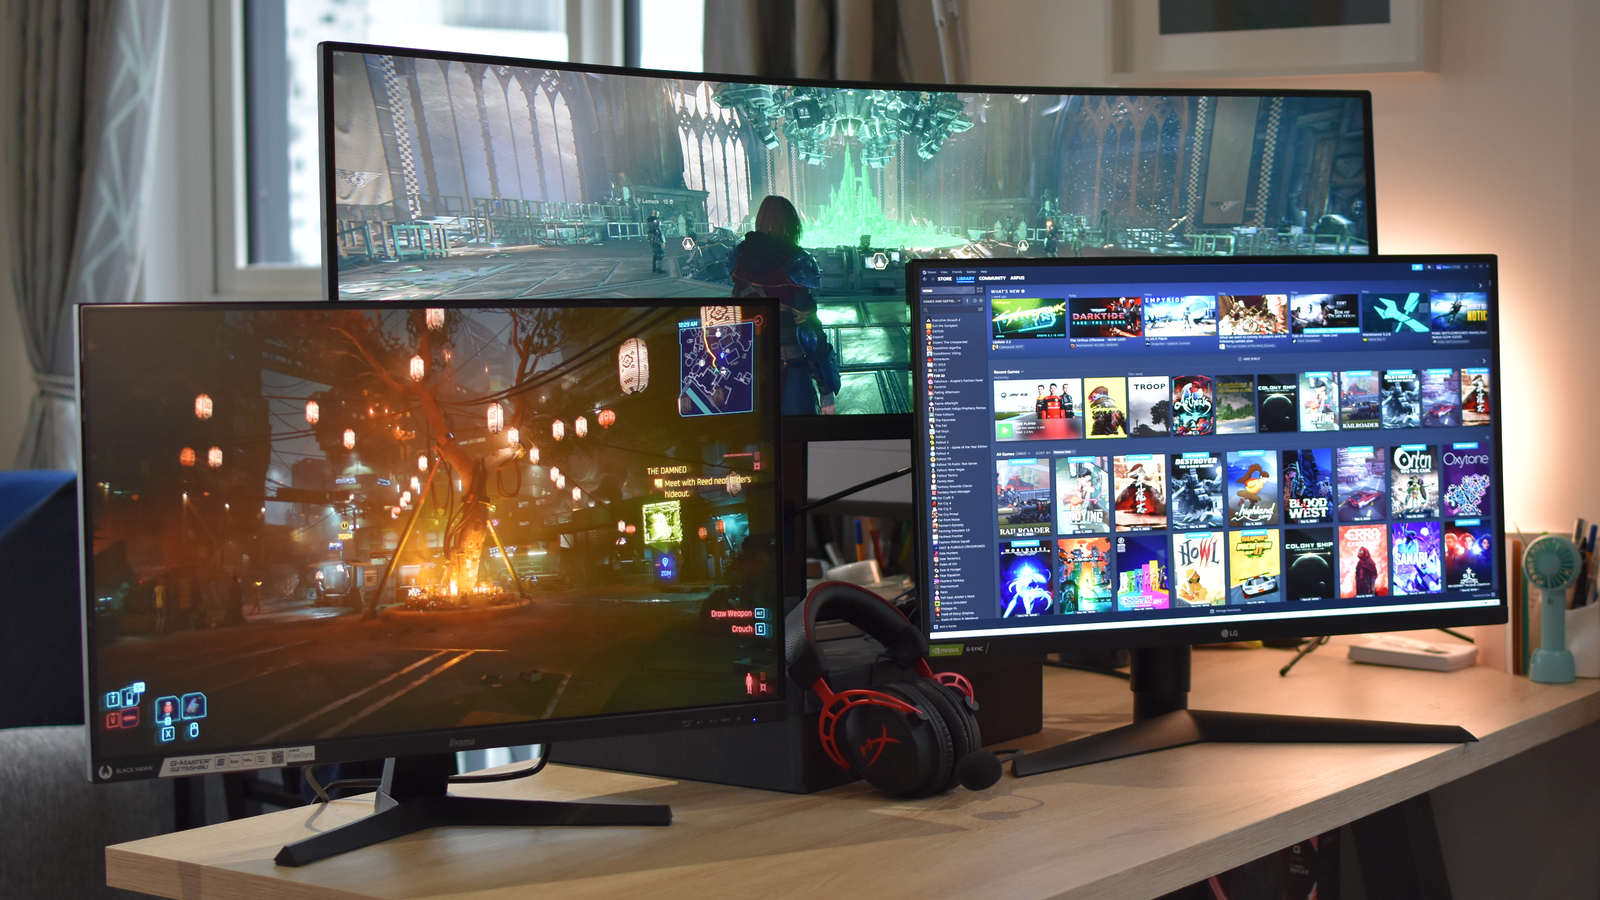 6 Best 240Hz 1440p Gaming Monitors in 2023 - Guiding Tech